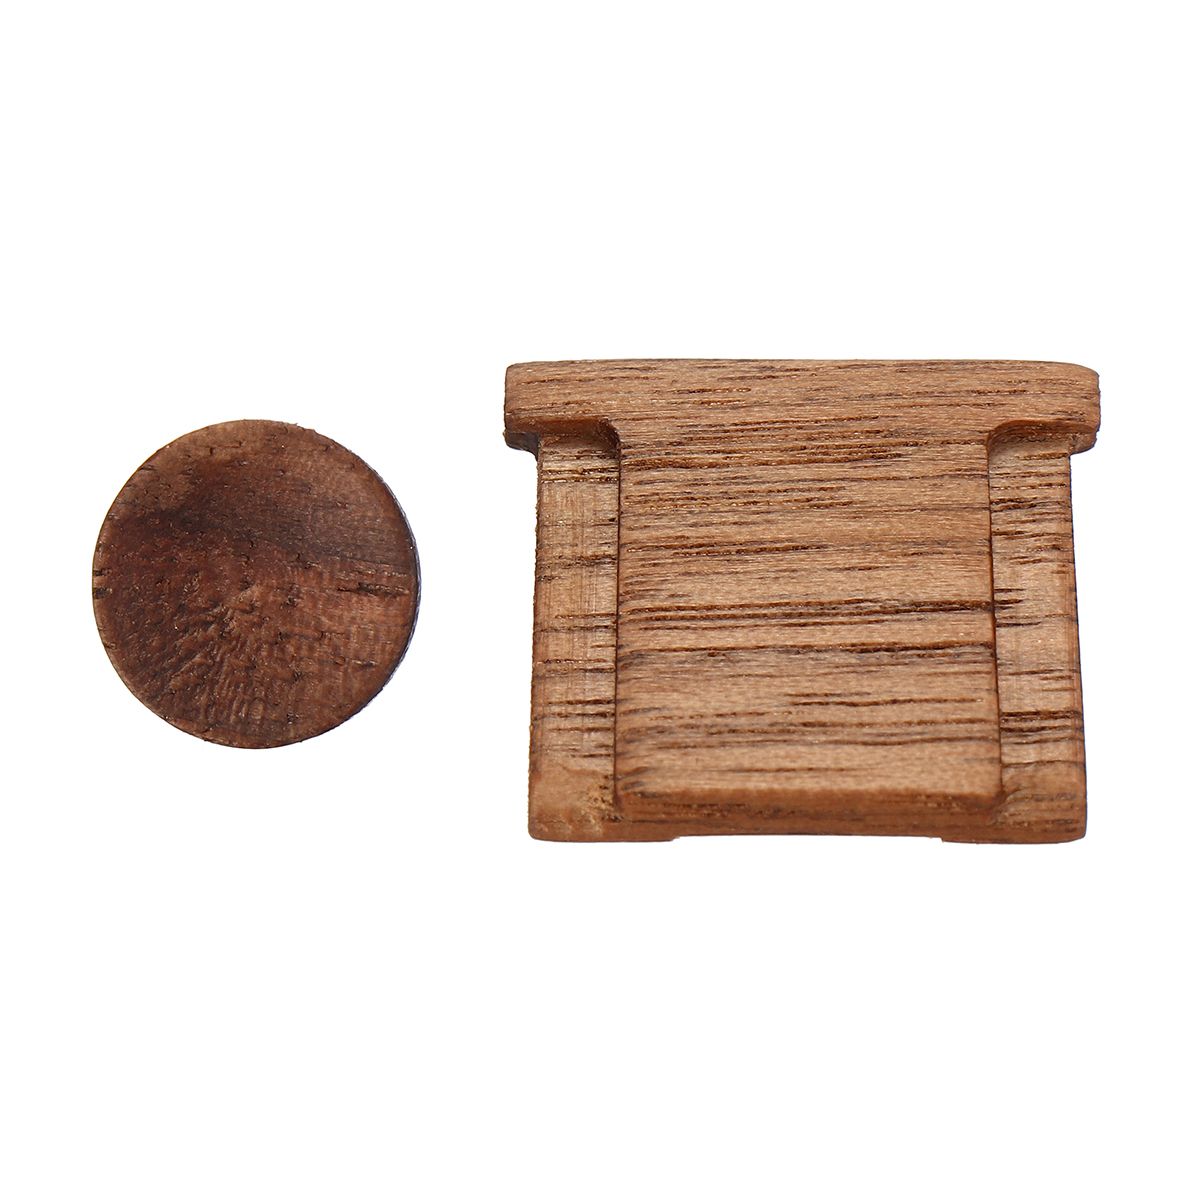 Wooden-Shutter-Button-with-Hot-Shoe-Cover-for-Fuji-X-Series-Buttons-1299050